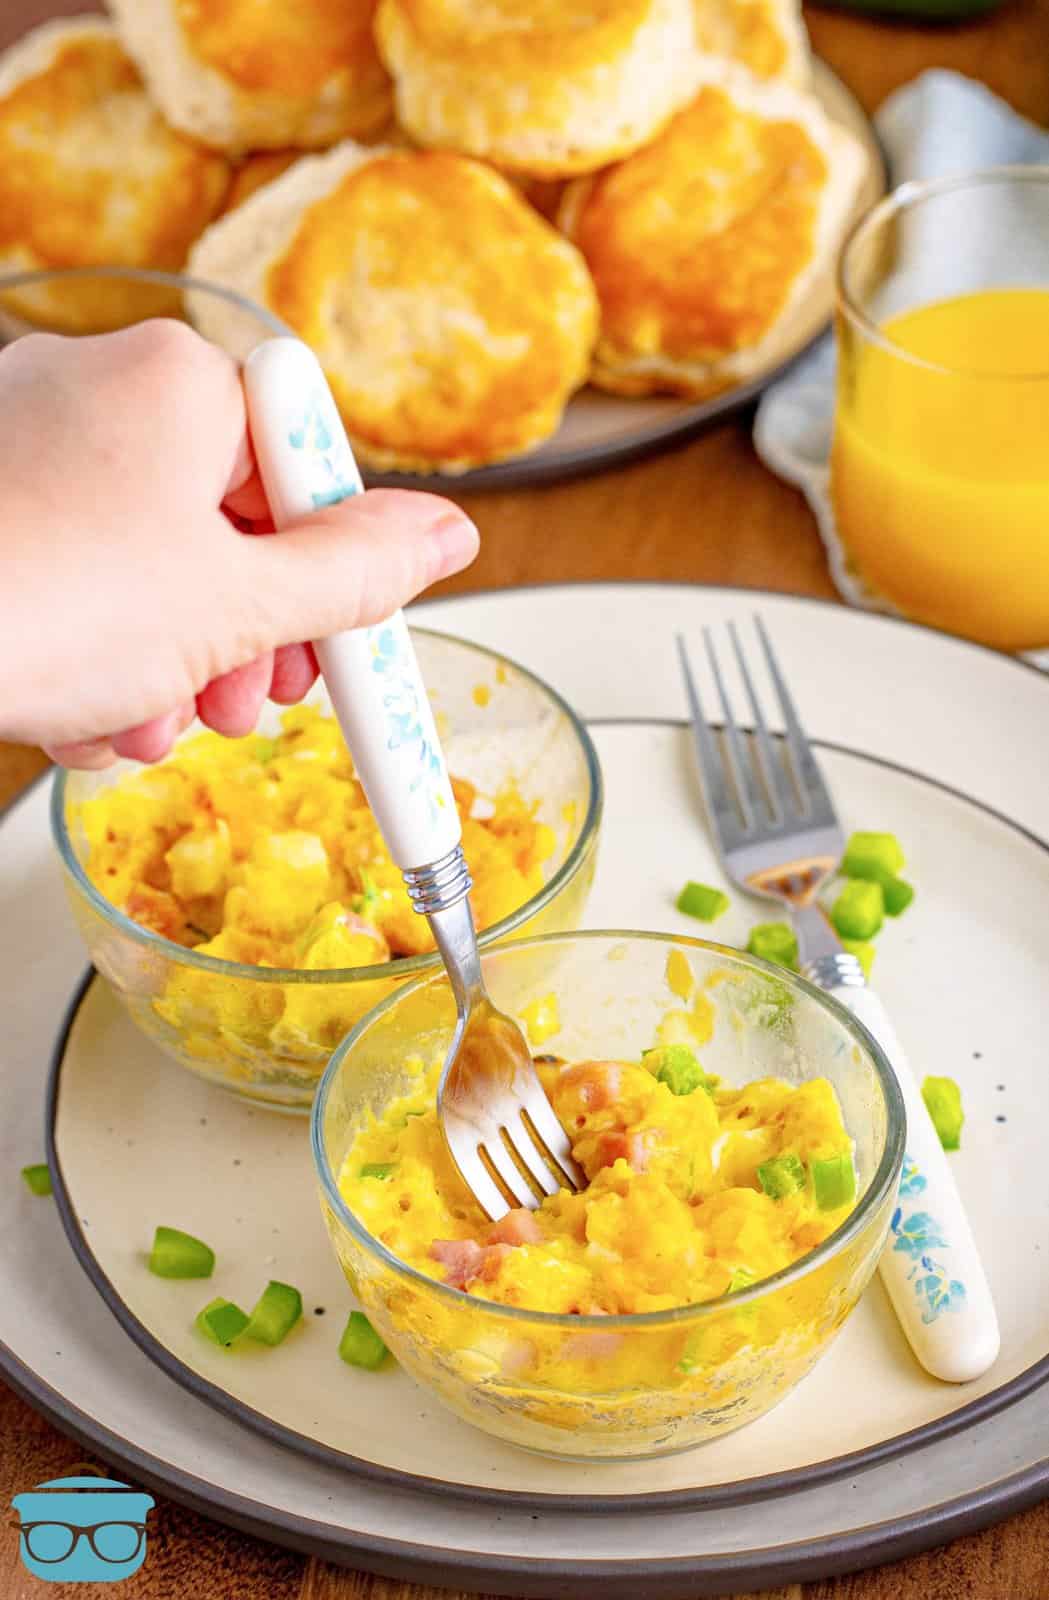 A fork getting a bite from a Microwave Scrambled Eggs Cup on a plate.